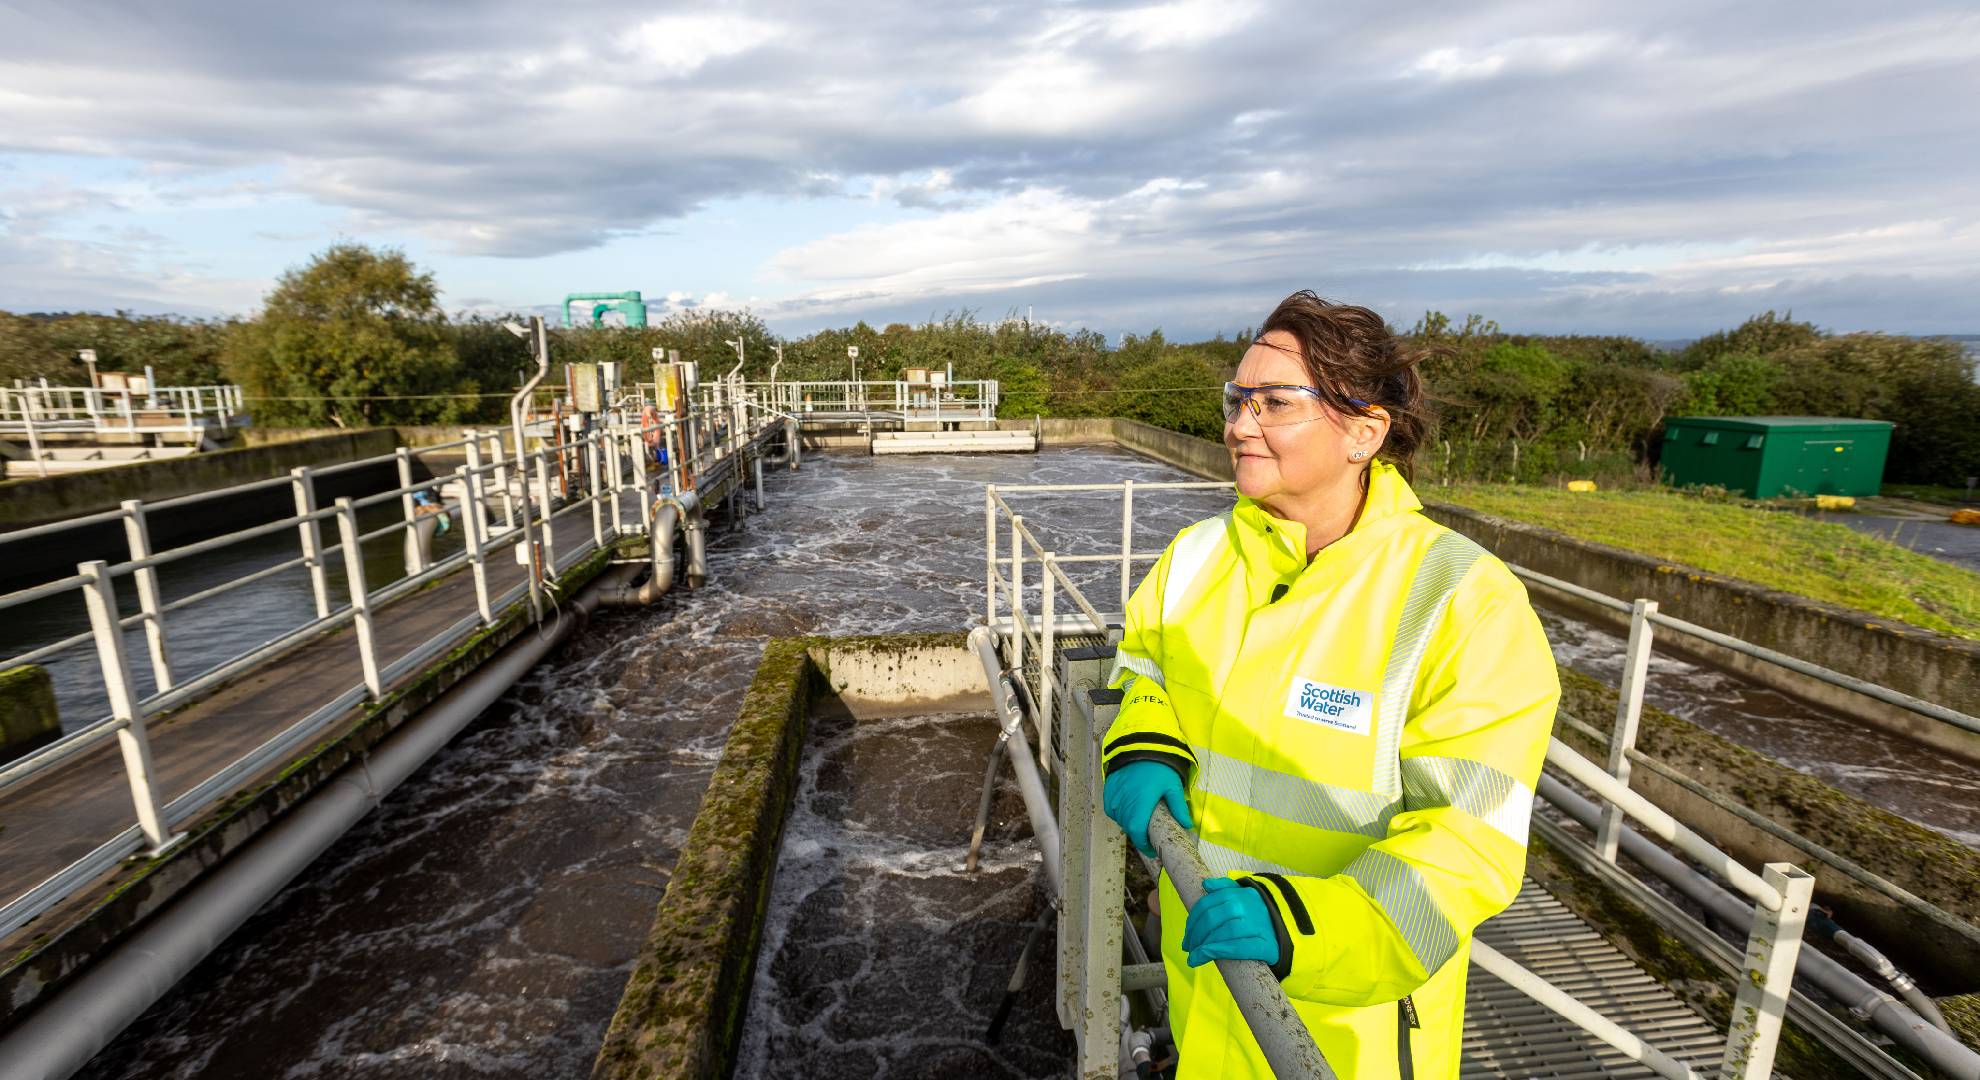 Woman in hivis jacket looking at water